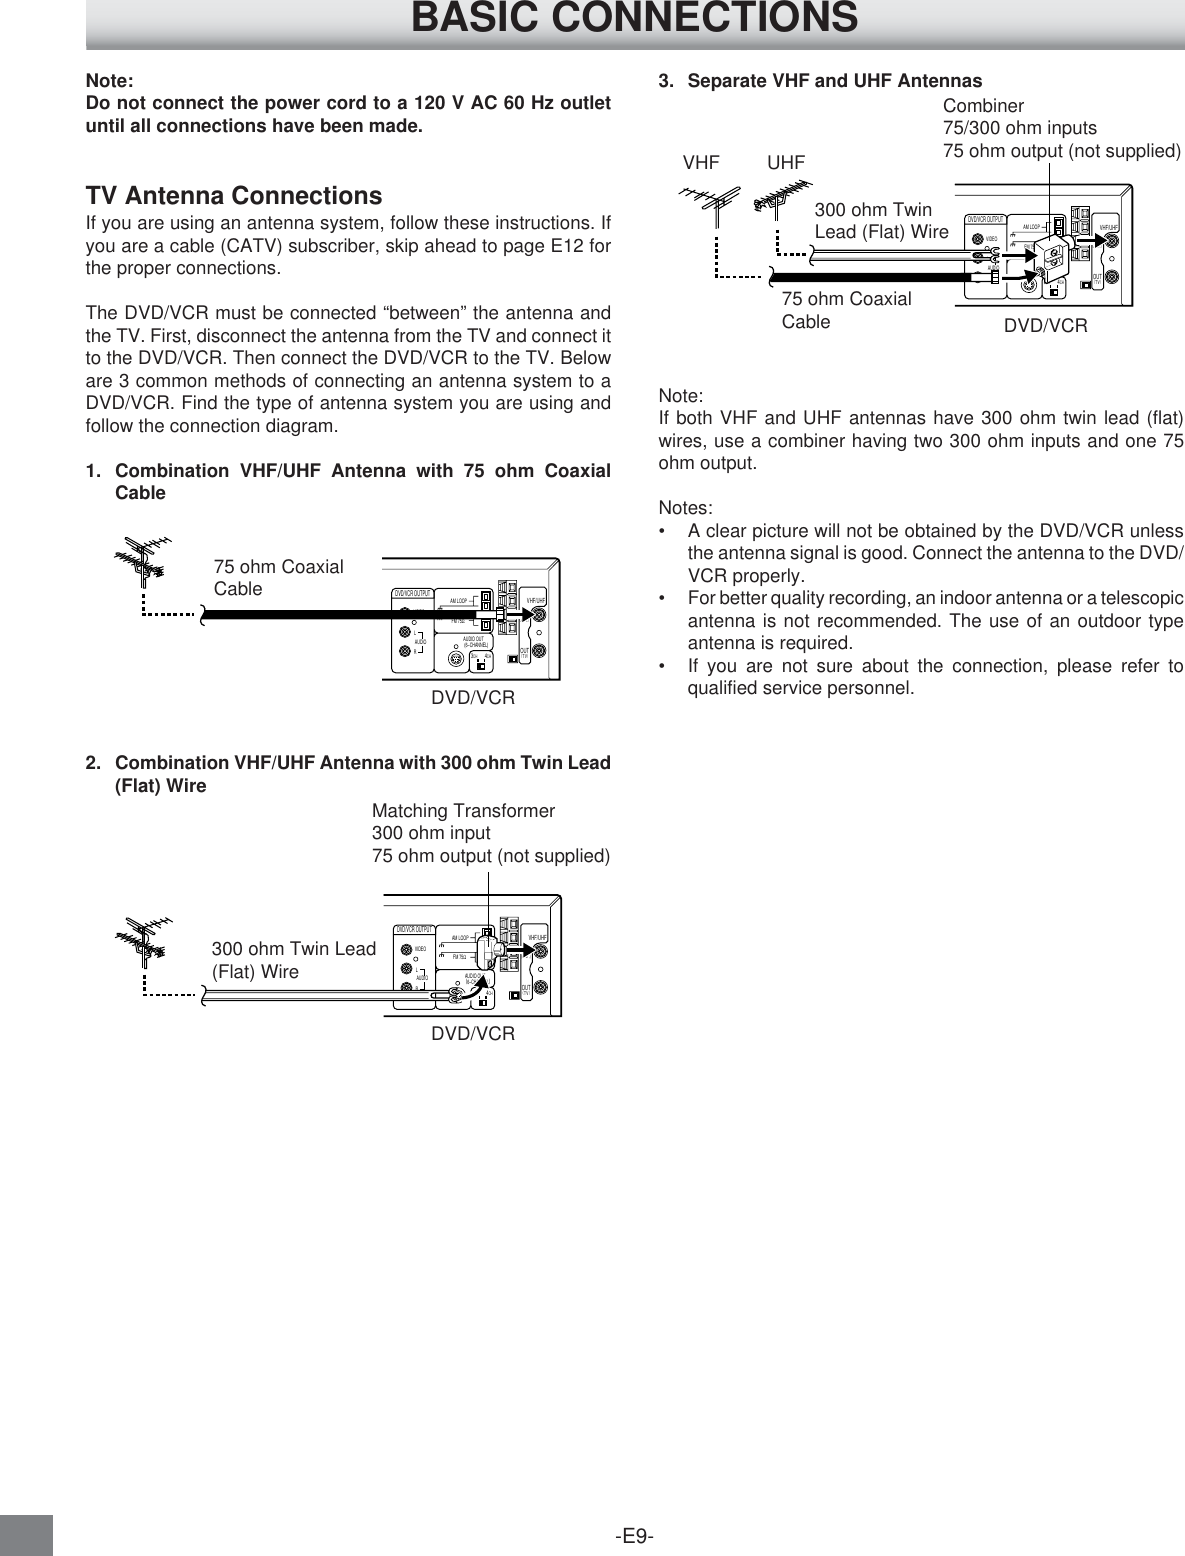 -E9-Note:Do not connect the power cord to a 120 V AC 60 Hz outletuntil all connections have been made.TV Antenna ConnectionsIf you are using an antenna system, follow these instructions. Ifyou are a cable (CATV) subscriber, skip ahead to page E12 forthe proper connections.The DVD/VCR must be connected “between” the antenna andthe TV. First, disconnect the antenna from the TV and connect itto the DVD/VCR. Then connect the DVD/VCR to the TV. Beloware 3 common methods of connecting an antenna system to aDVD/VCR. Find the type of antenna system you are using andfollow the connection diagram.1. Combination VHF/UHF Antenna with 75 ohm CoaxialCable2. Combination VHF/UHF Antenna with 300 ohm Twin Lead(Flat) Wire3. Separate VHF and UHF AntennasNote:If both VHF and UHF antennas have 300 ohm twin lead (flat)wires, use a combiner having two 300 ohm inputs and one 75ohm output.Notes:•A clear picture will not be obtained by the DVD/VCR unlessthe antenna signal is good. Connect the antenna to the DVD/VCR properly.•For better quality recording, an indoor antenna or a telescopicantenna is not recommended. The use of an outdoor typeantenna is required.•If you are not sure about the connection, please refer toqualified service personnel.300 ohm Twin Lead(Flat) Wire3CH4CHVIDEOAM LOOPAUDIO AUDIO OUT (6–CHANNEL)LRINVHF/UHFANT.(          )OUTTV(       )DVD/VCR OUTPUTFM 75ΩDVD/VCRMatching Transformer300 ohm input75 ohm output (not supplied)VHF         UHF3CH4CHVIDEOAM LOOPAUDIO AUDIO OUT (6–CHANNEL)LRINVHF/UHFANT.(          )OUTTV(       )DVD/VCR OUTPUTFM 75ΩDVD/VCRCombiner75/300 ohm inputs75 ohm output (not supplied)300 ohm TwinLead (Flat) Wire75 ohm CoaxialCableBASIC CONNECTIONS75 ohm CoaxialCableDVD/VCR3CH4CHVIDEOAM LOOPAUDIO AUDIO OUT (6–CHANNEL)LRINVHF/UHFANT.(          )OUTTV(       )DVD/VCR OUTPUTFM 75Ω